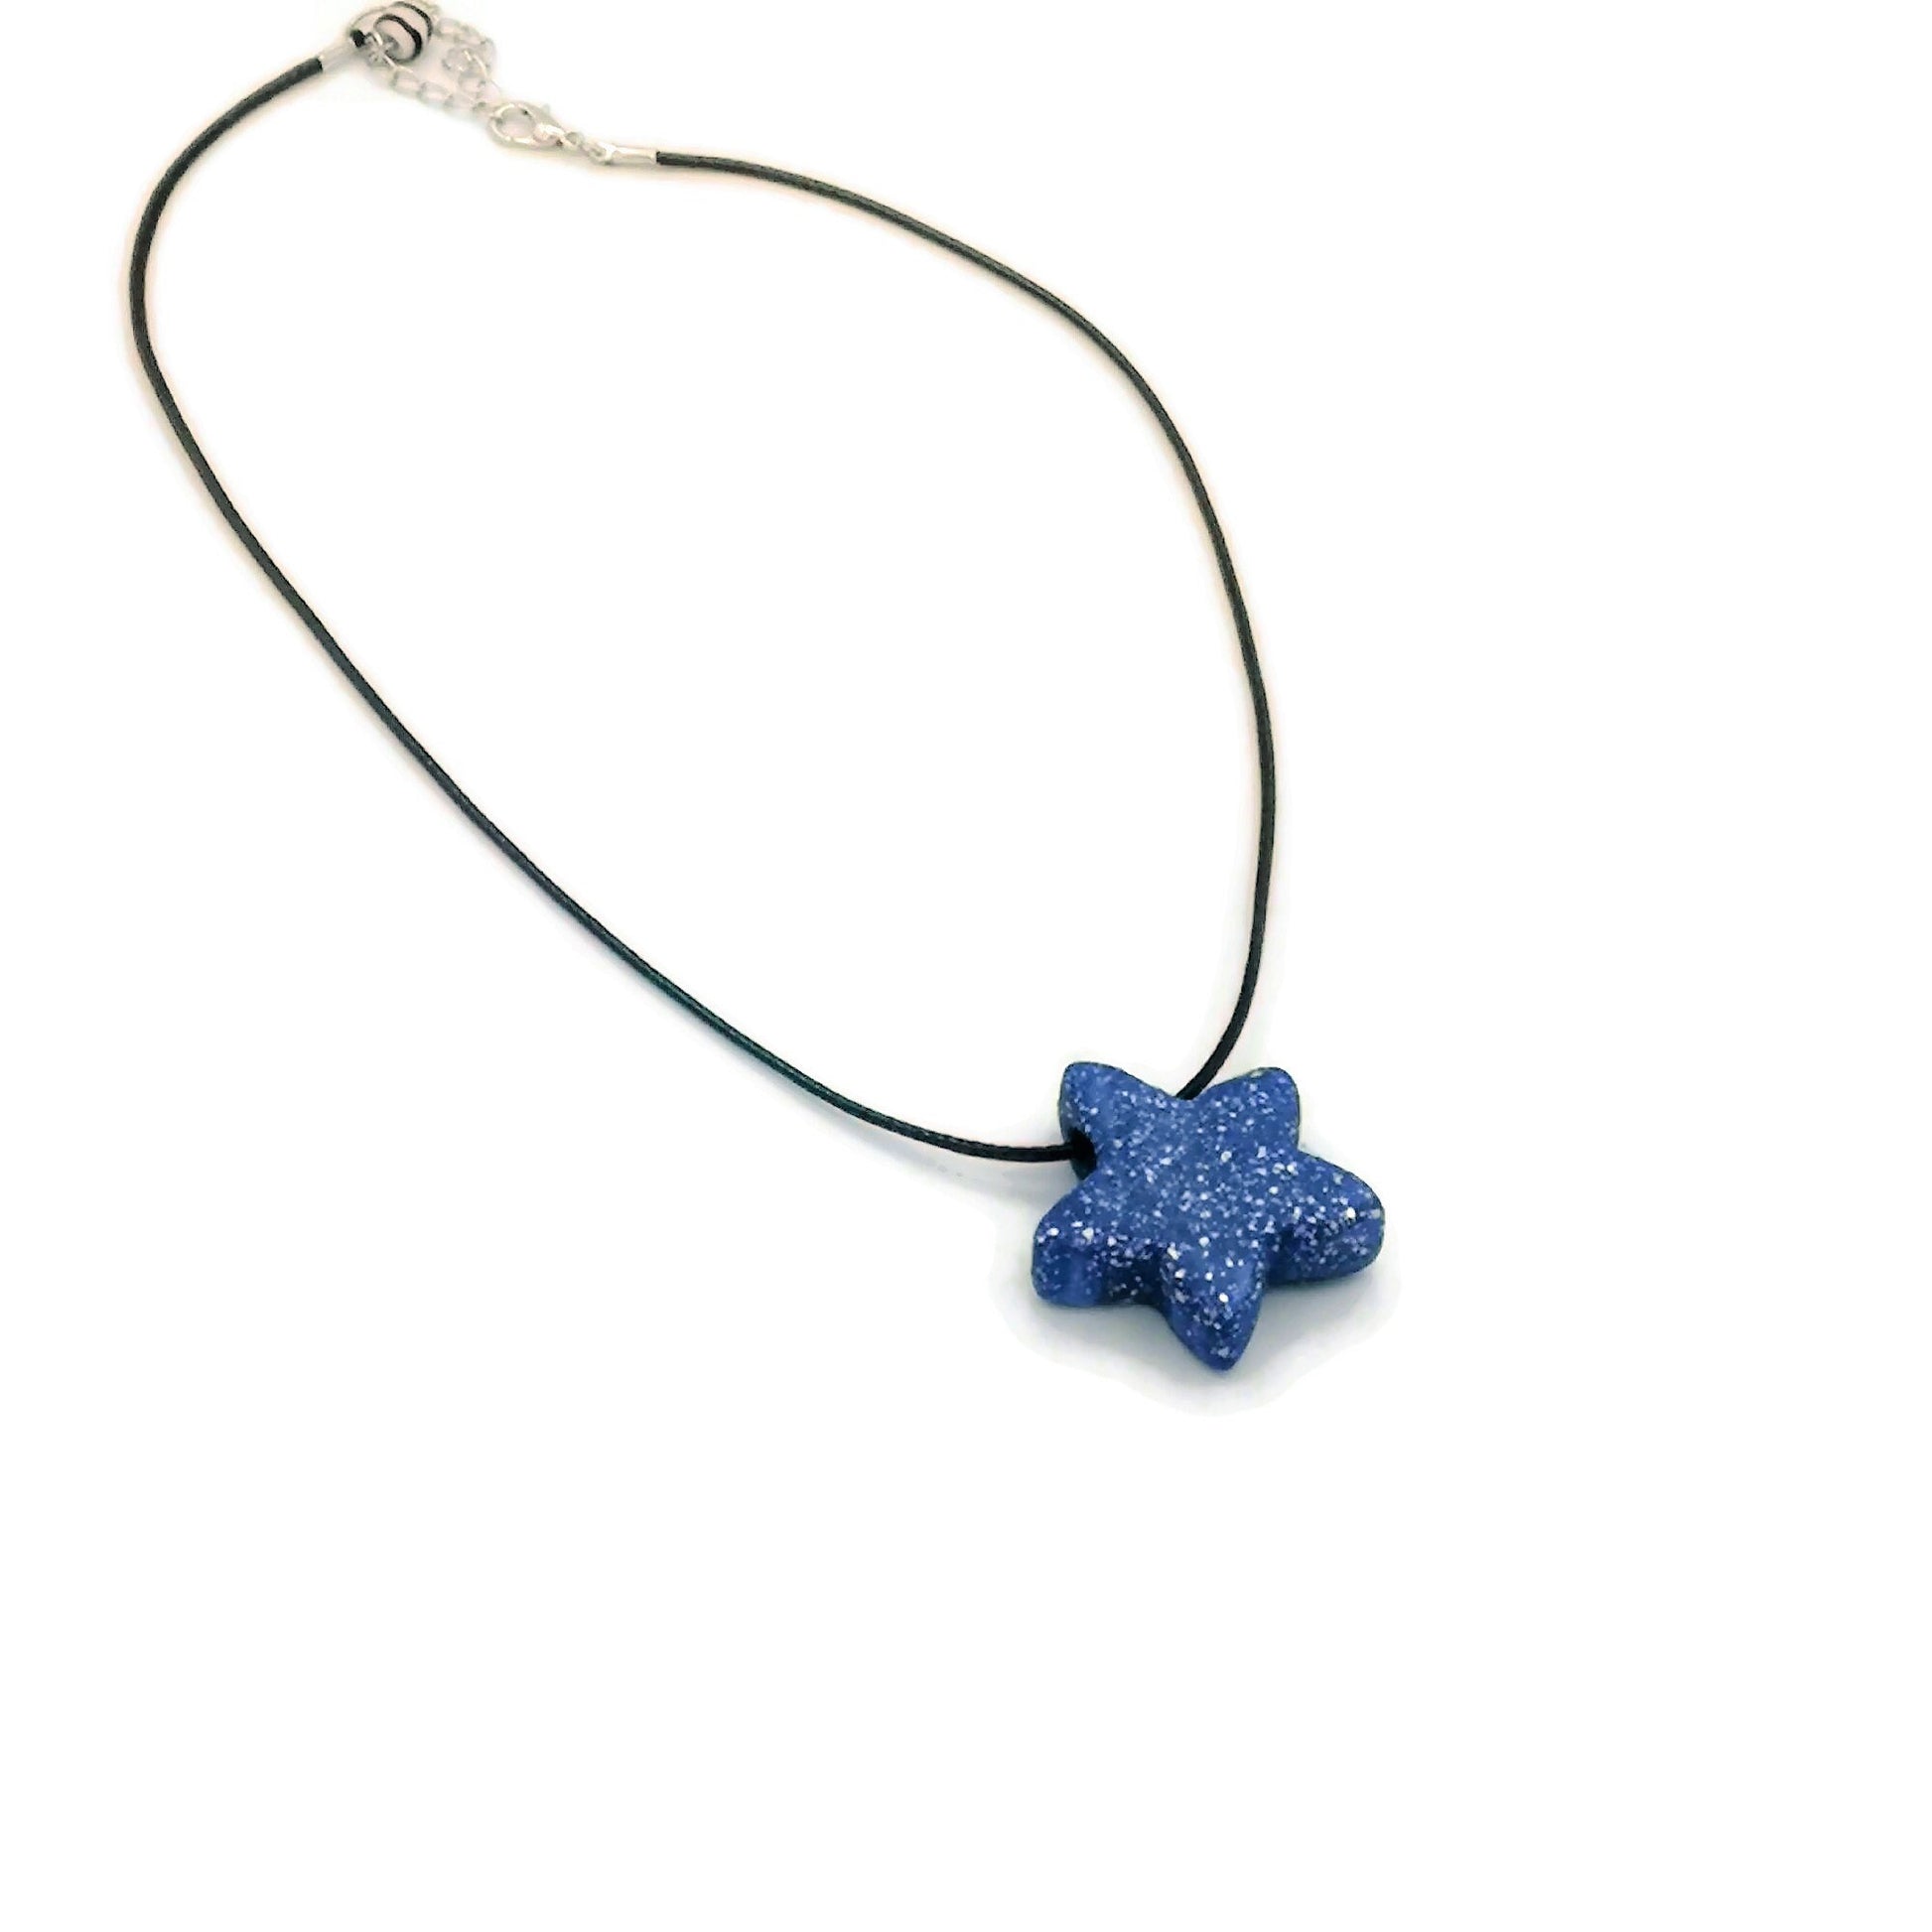 EVERYDAY NECKLACE PENDANT, Statement Star Necklace Boho Clay Necklace, Best Pendant Necklace For Her, Cute Mother Day Gift From Daughter - Ceramica Ana Rafael